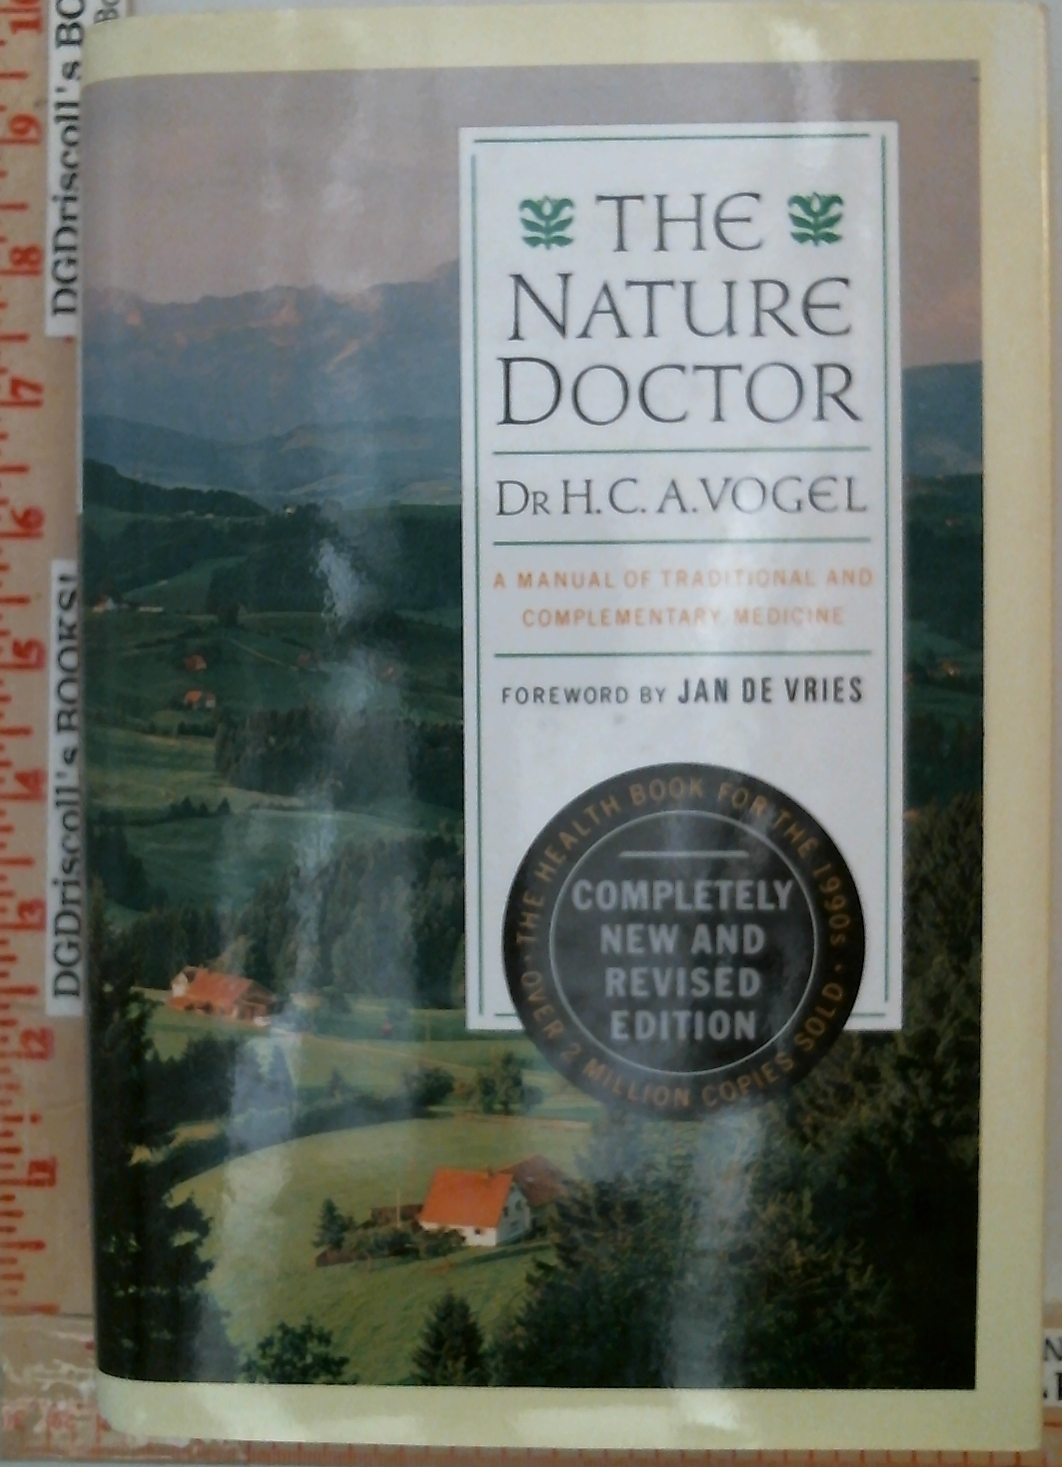 The Nature Doctor